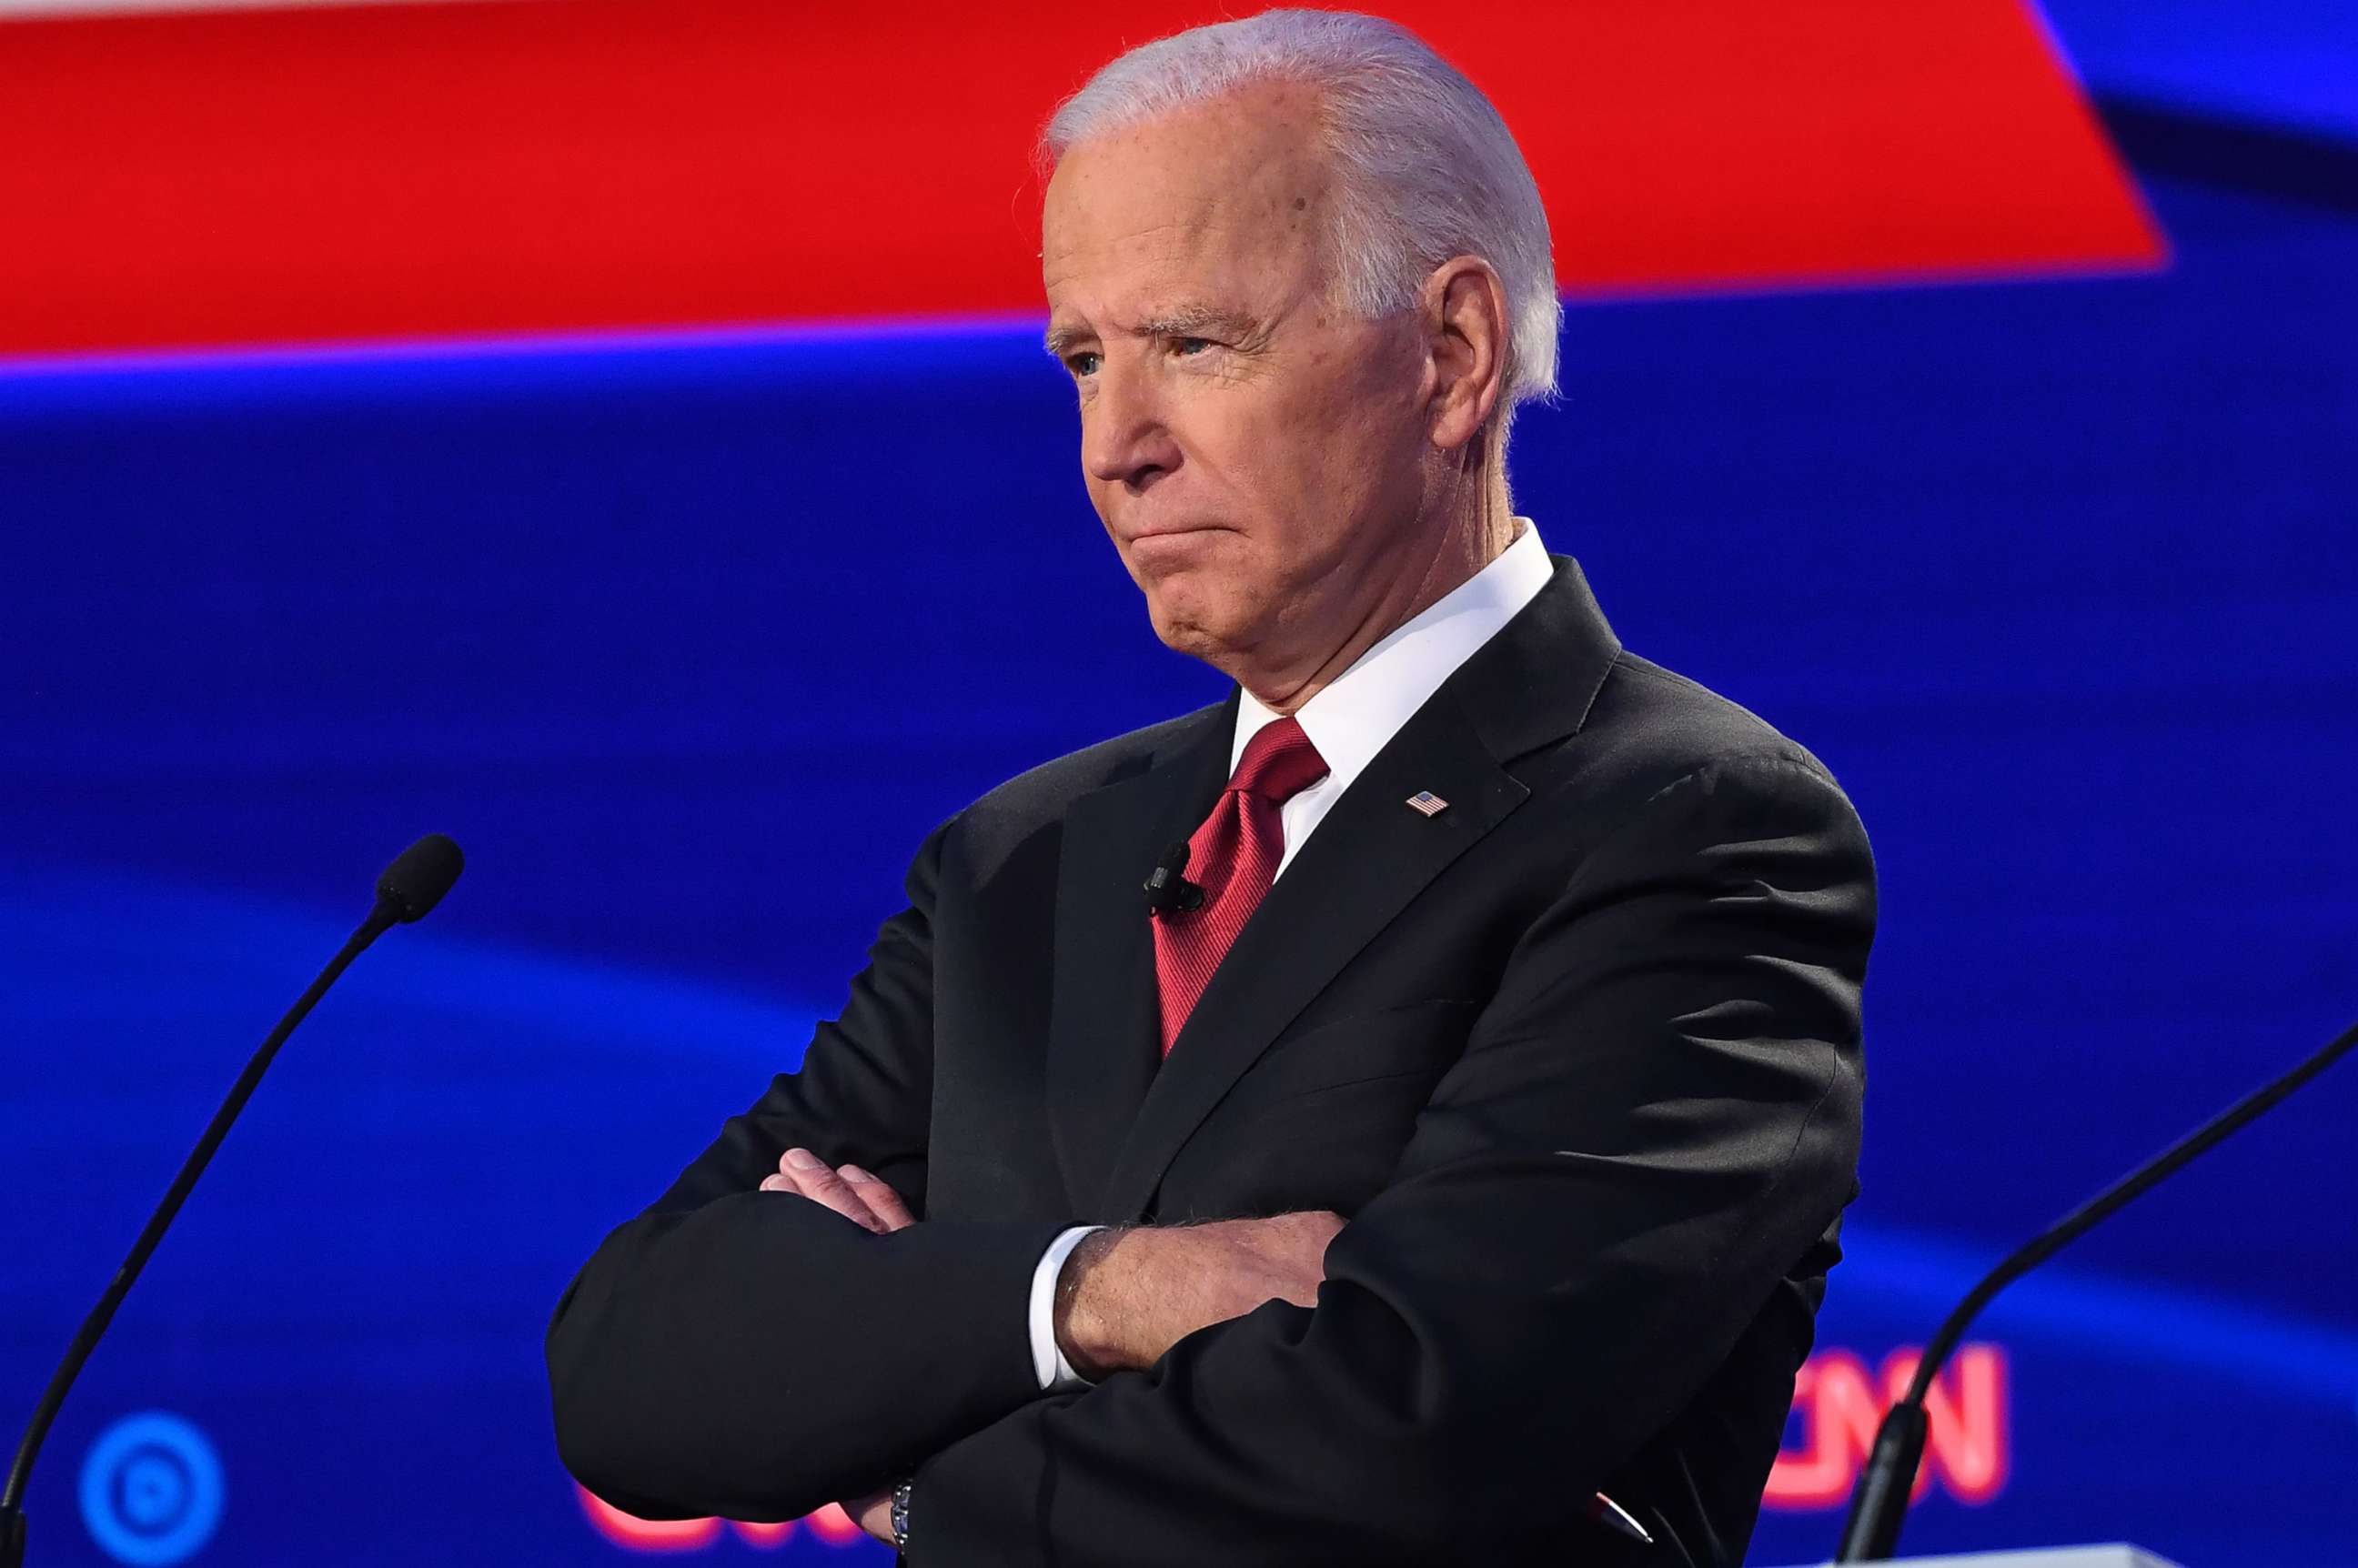 PHOTO: Democratic presidential hopeful former Vice President Joe Biden gestures during the fourth Democratic primary debate of the 2020 presidential campaign season in Westerville, Ohio on Oct. 15, 2019.